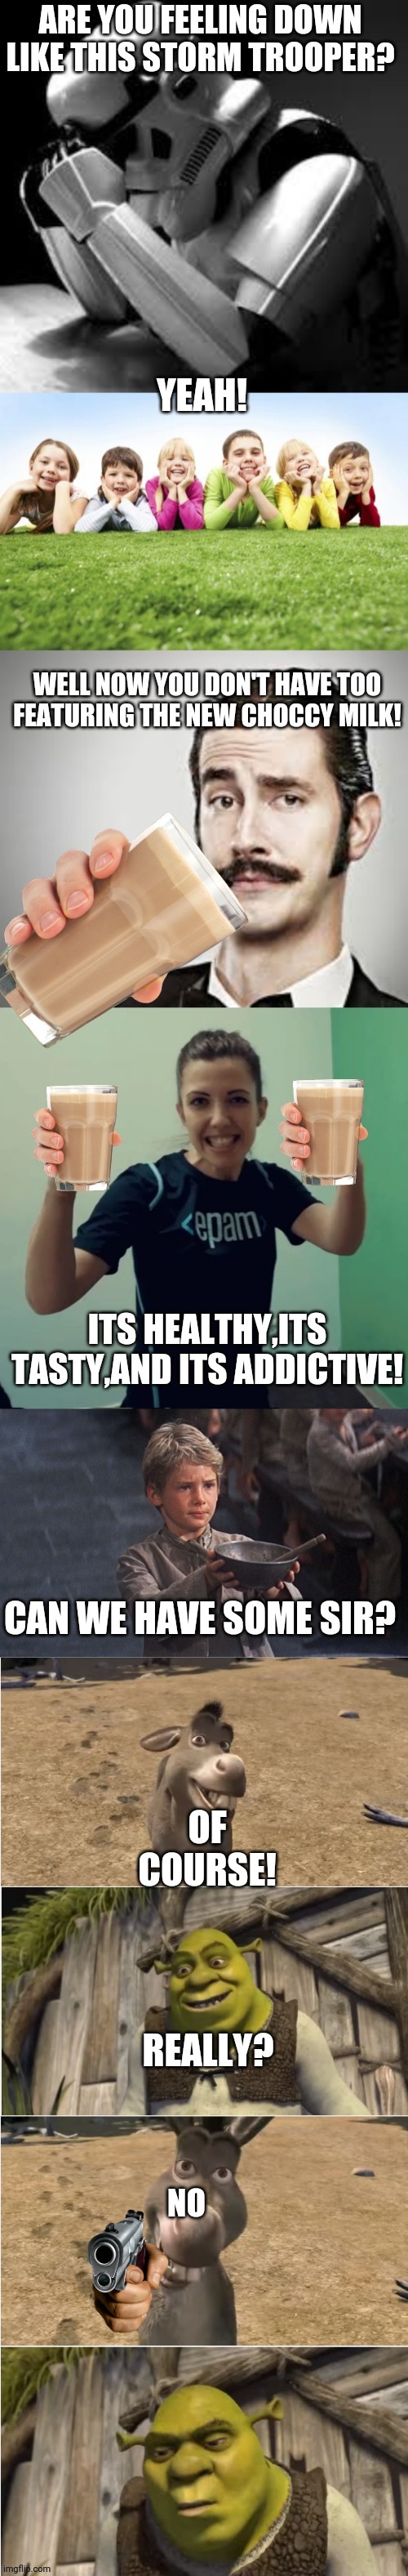 Choccy | image tagged in funny,memes,chocolate milk,choccy,cool,epic | made w/ Imgflip meme maker